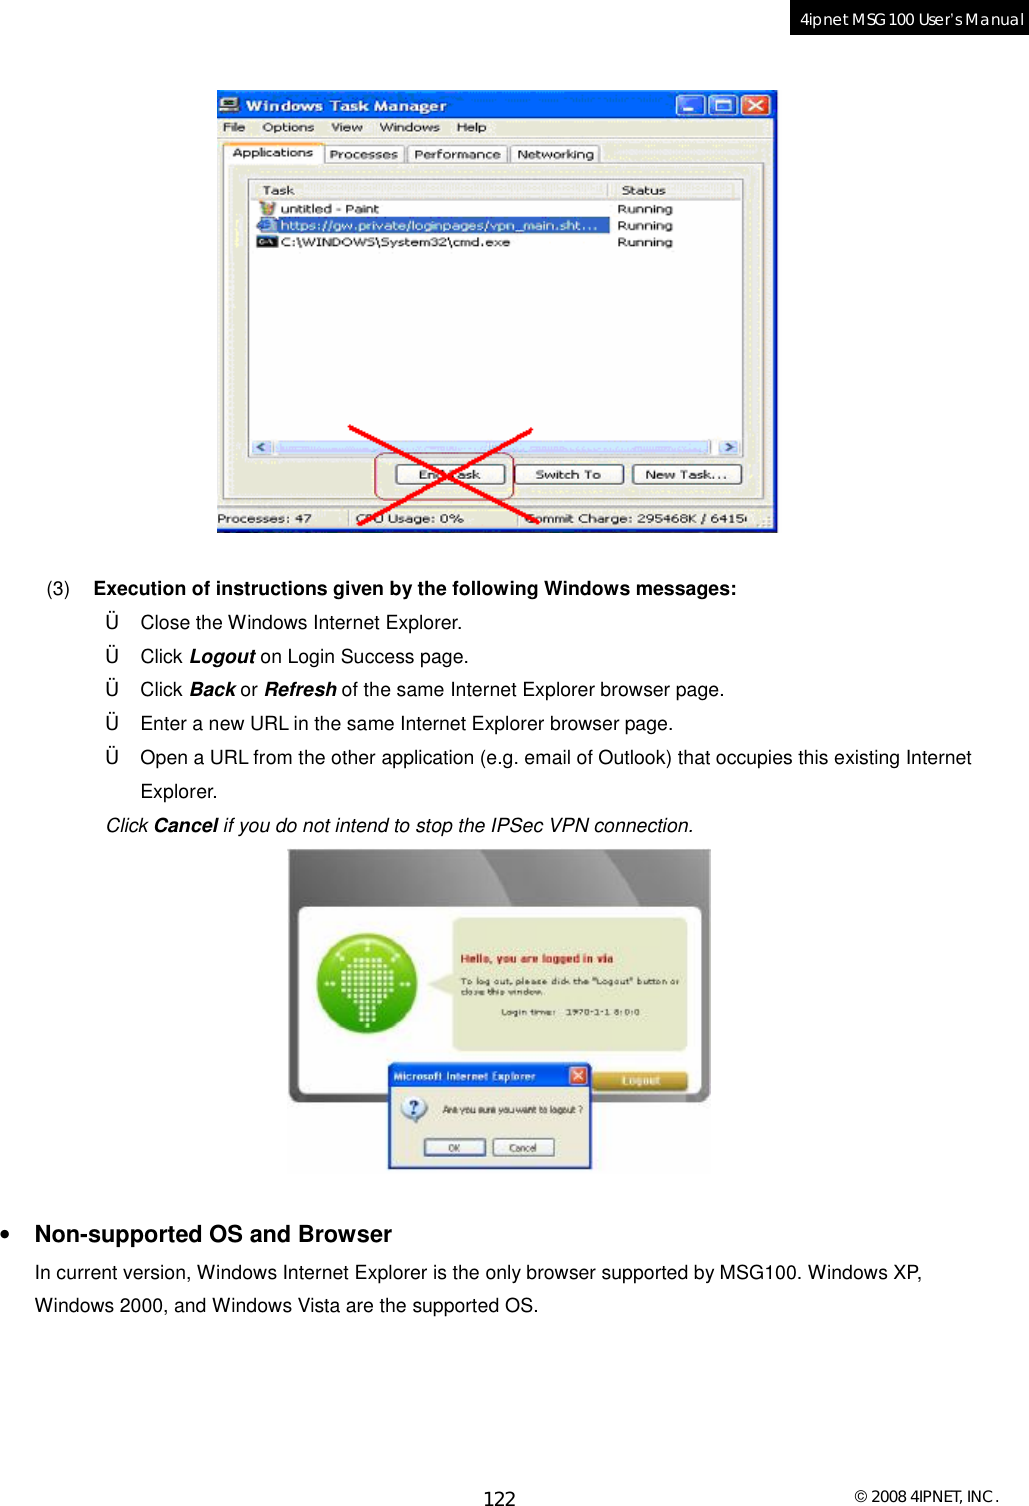  © 2008 4IPNET, INC. 122 4ipnet MSG100 User’s Manual     (3)  Execution of instructions given by the following Windows messages: † Close the Windows Internet Explorer. † Click Logout on Login Success page. † Click Back or Refresh of the same Internet Explorer browser page. † Enter a new URL in the same Internet Explorer browser page. † Open a URL from the other application (e.g. email of Outlook) that occupies this existing Internet Explorer. Click Cancel if you do not intend to stop the IPSec VPN connection.   • Non-supported OS and Browser In current version, Windows Internet Explorer is the only browser supported by MSG100. Windows XP, Windows 2000, and Windows Vista are the supported OS. 